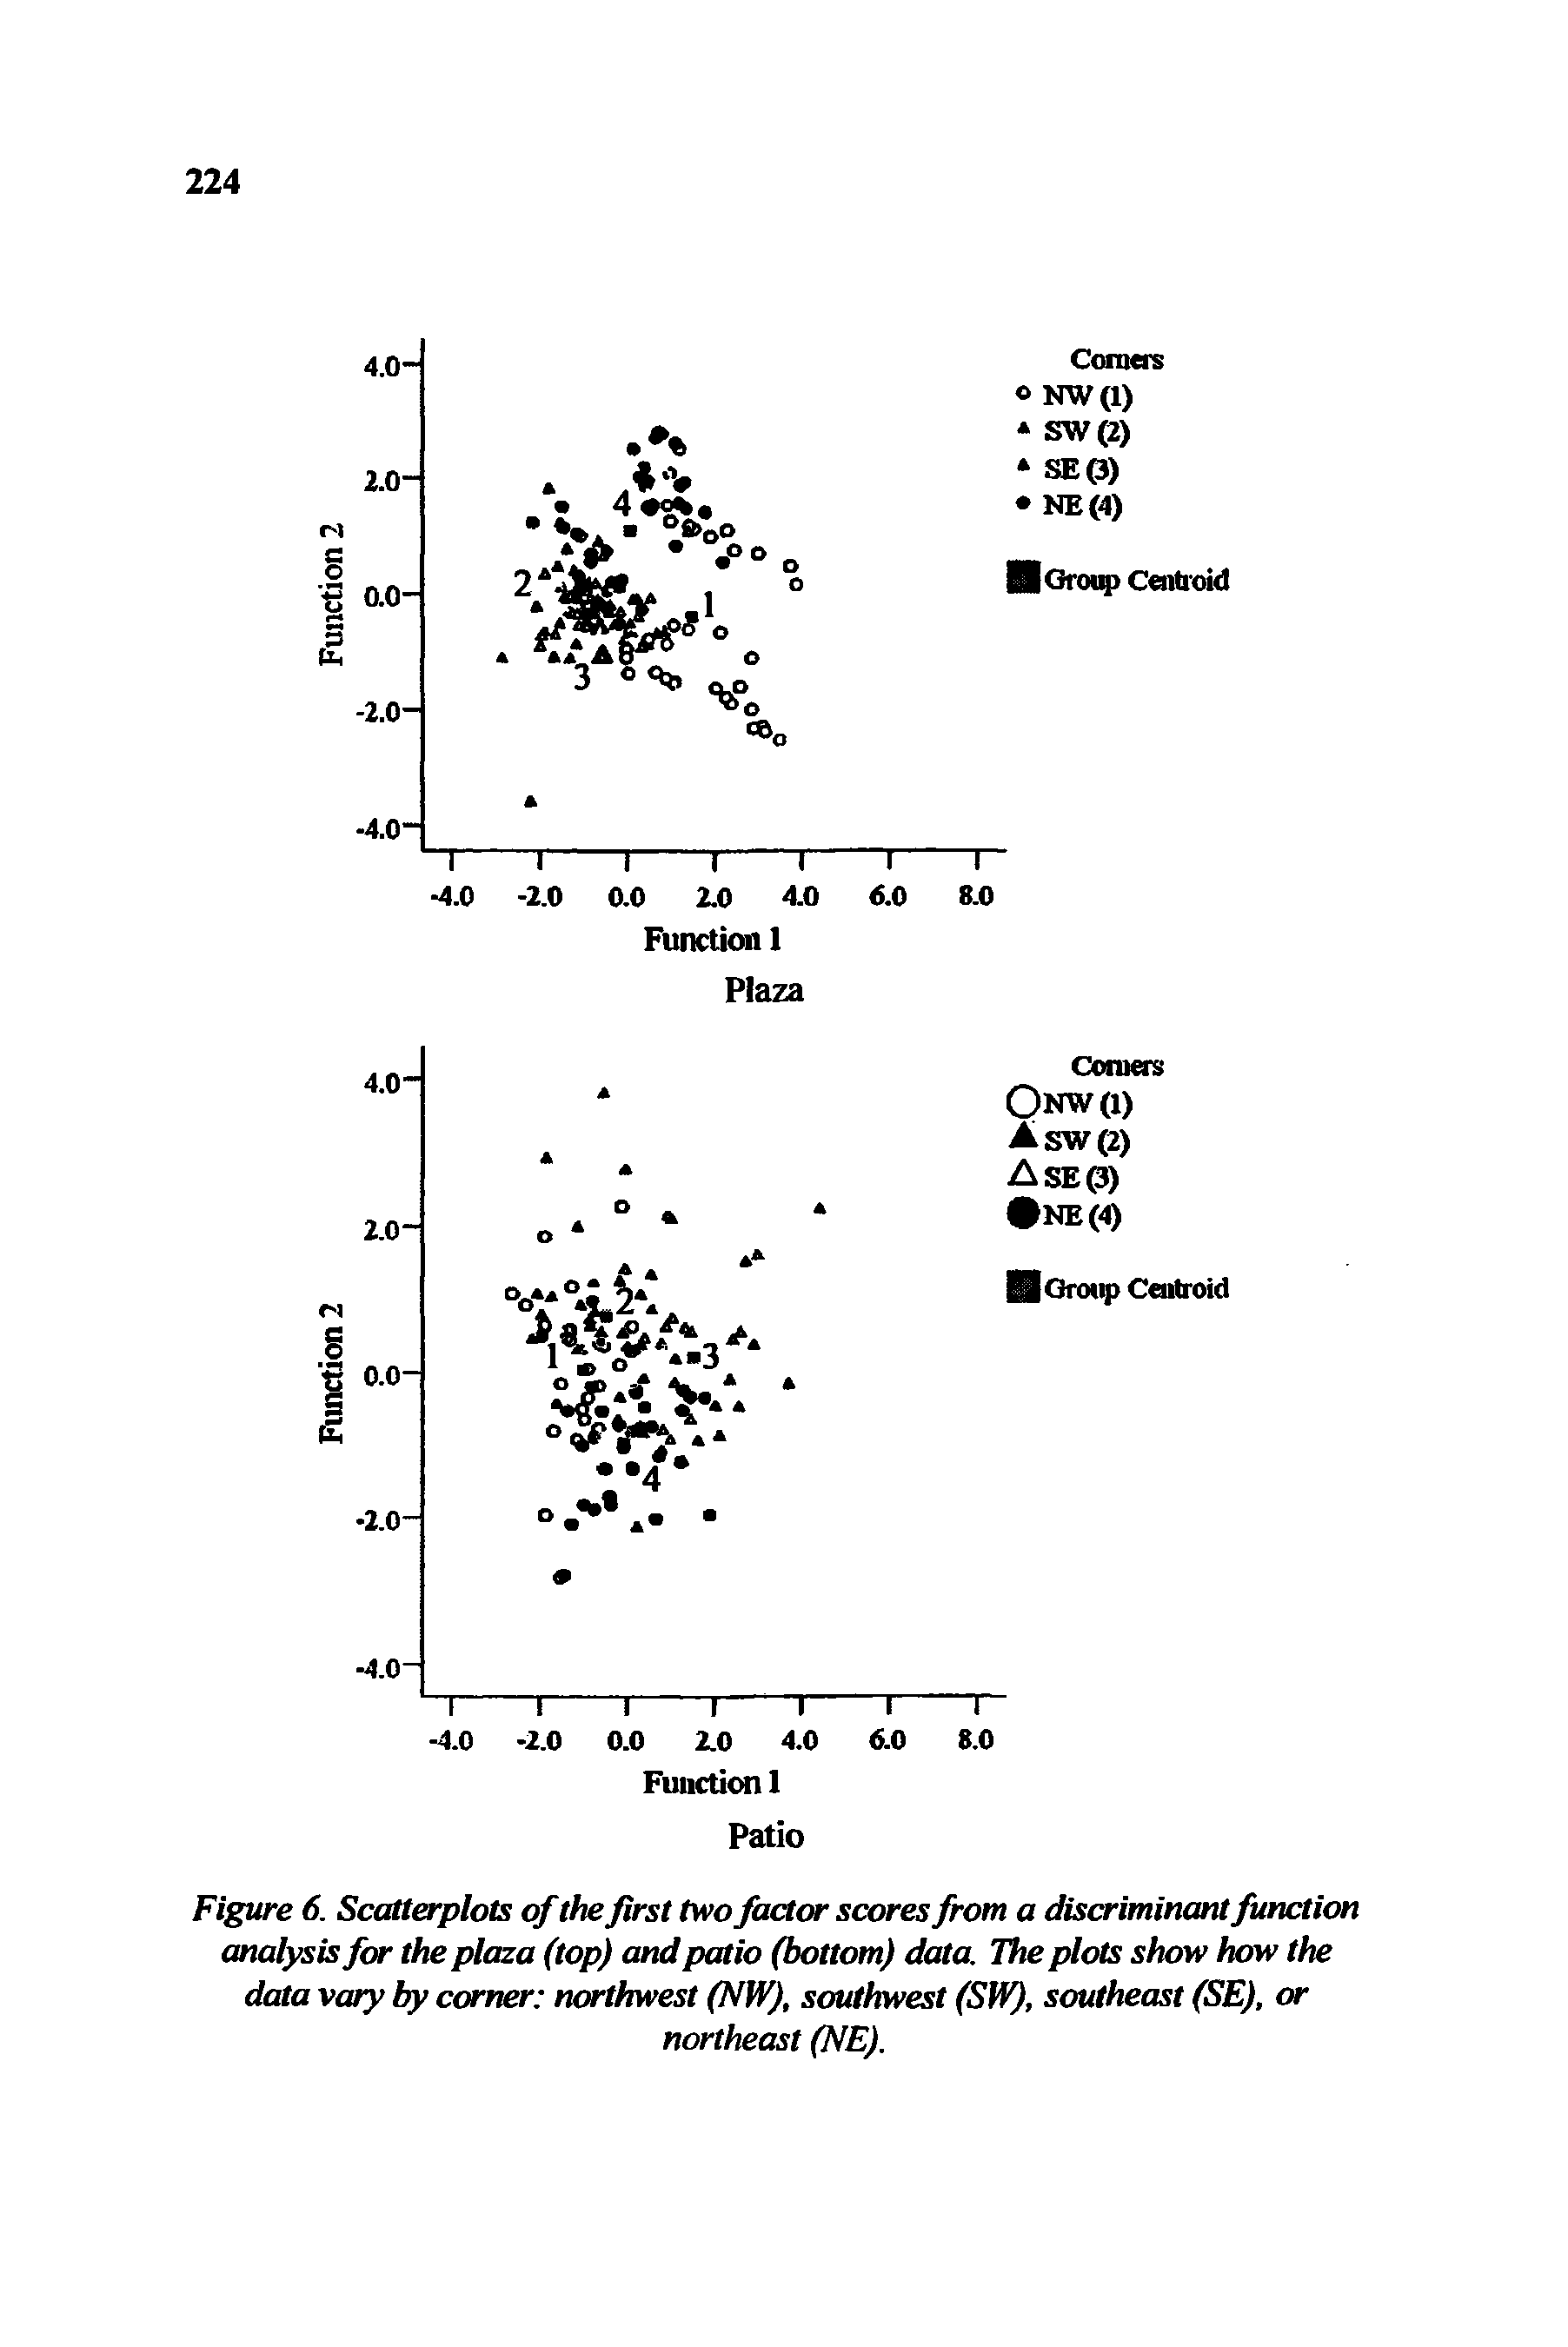 Figure 6. Scatterplots of the first two factor scores from a discriminant function analysis for the plaza (top) and patio (bottom) data. The plots show haw the data vary by corner northwest (NW), southwest (SW), southeast (SE), or...